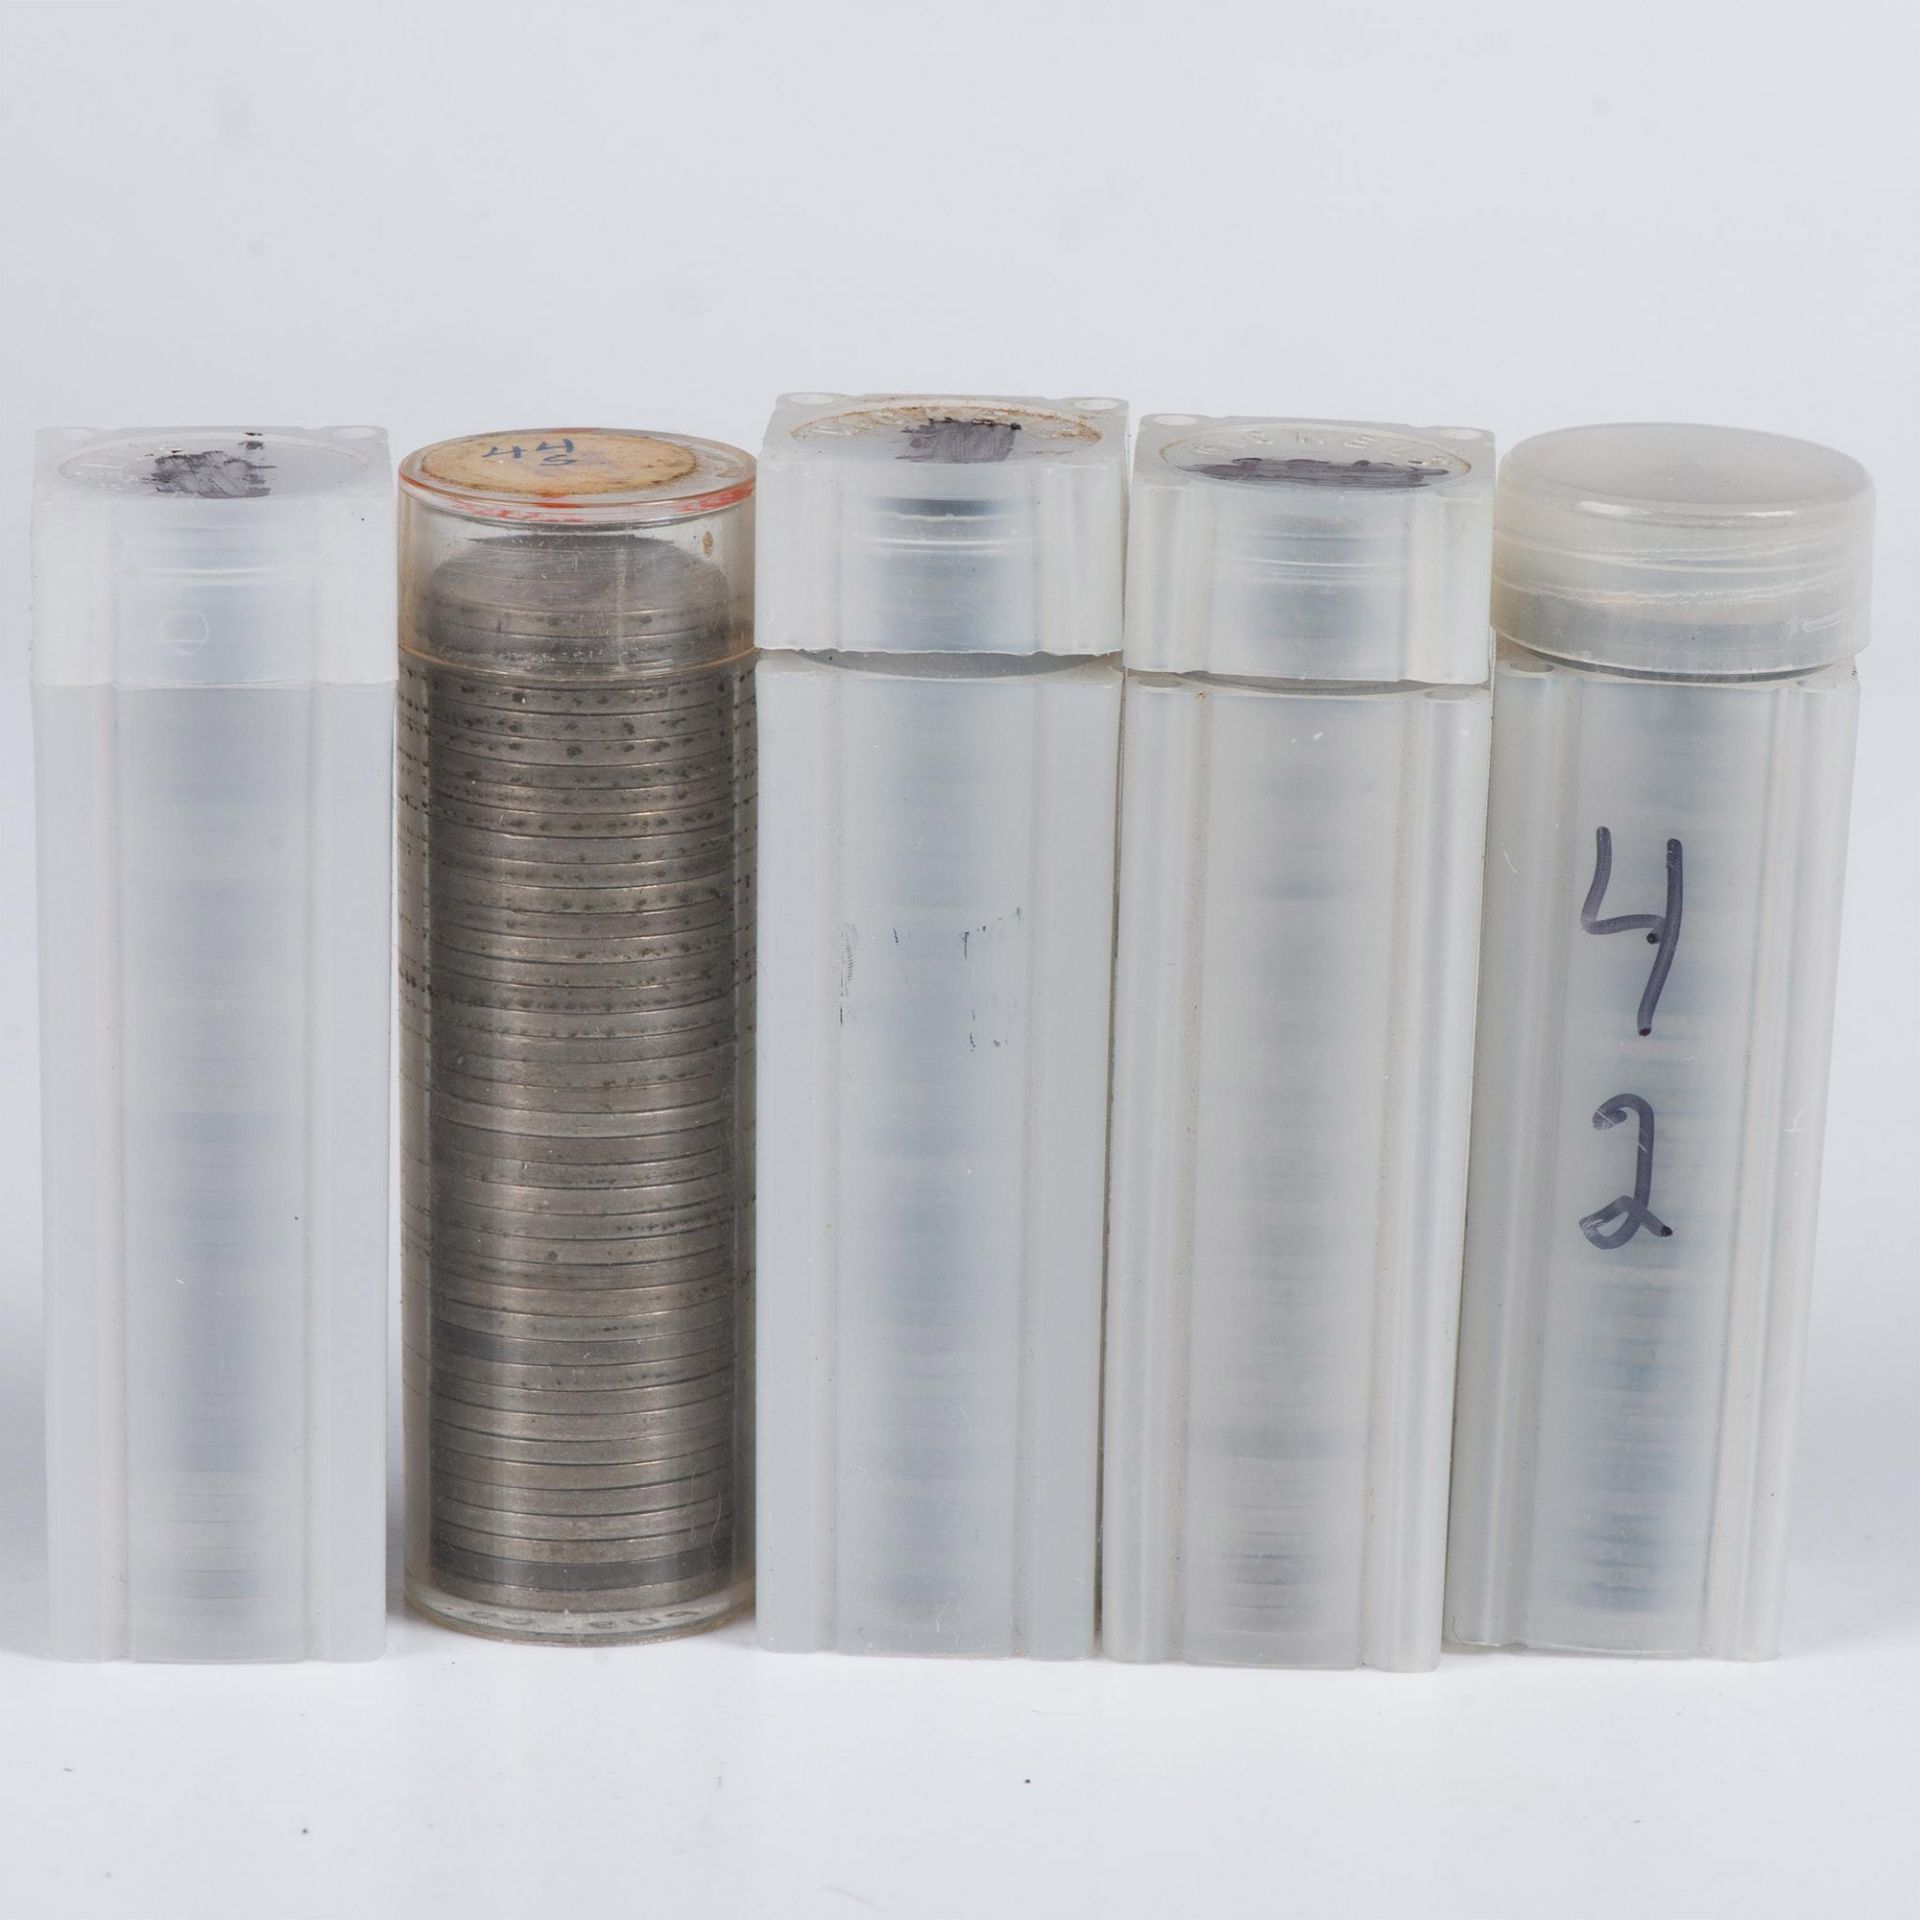 5 ROLLS OF US SILVER WWII NICKELS (40 PER ROLL) - Image 3 of 10